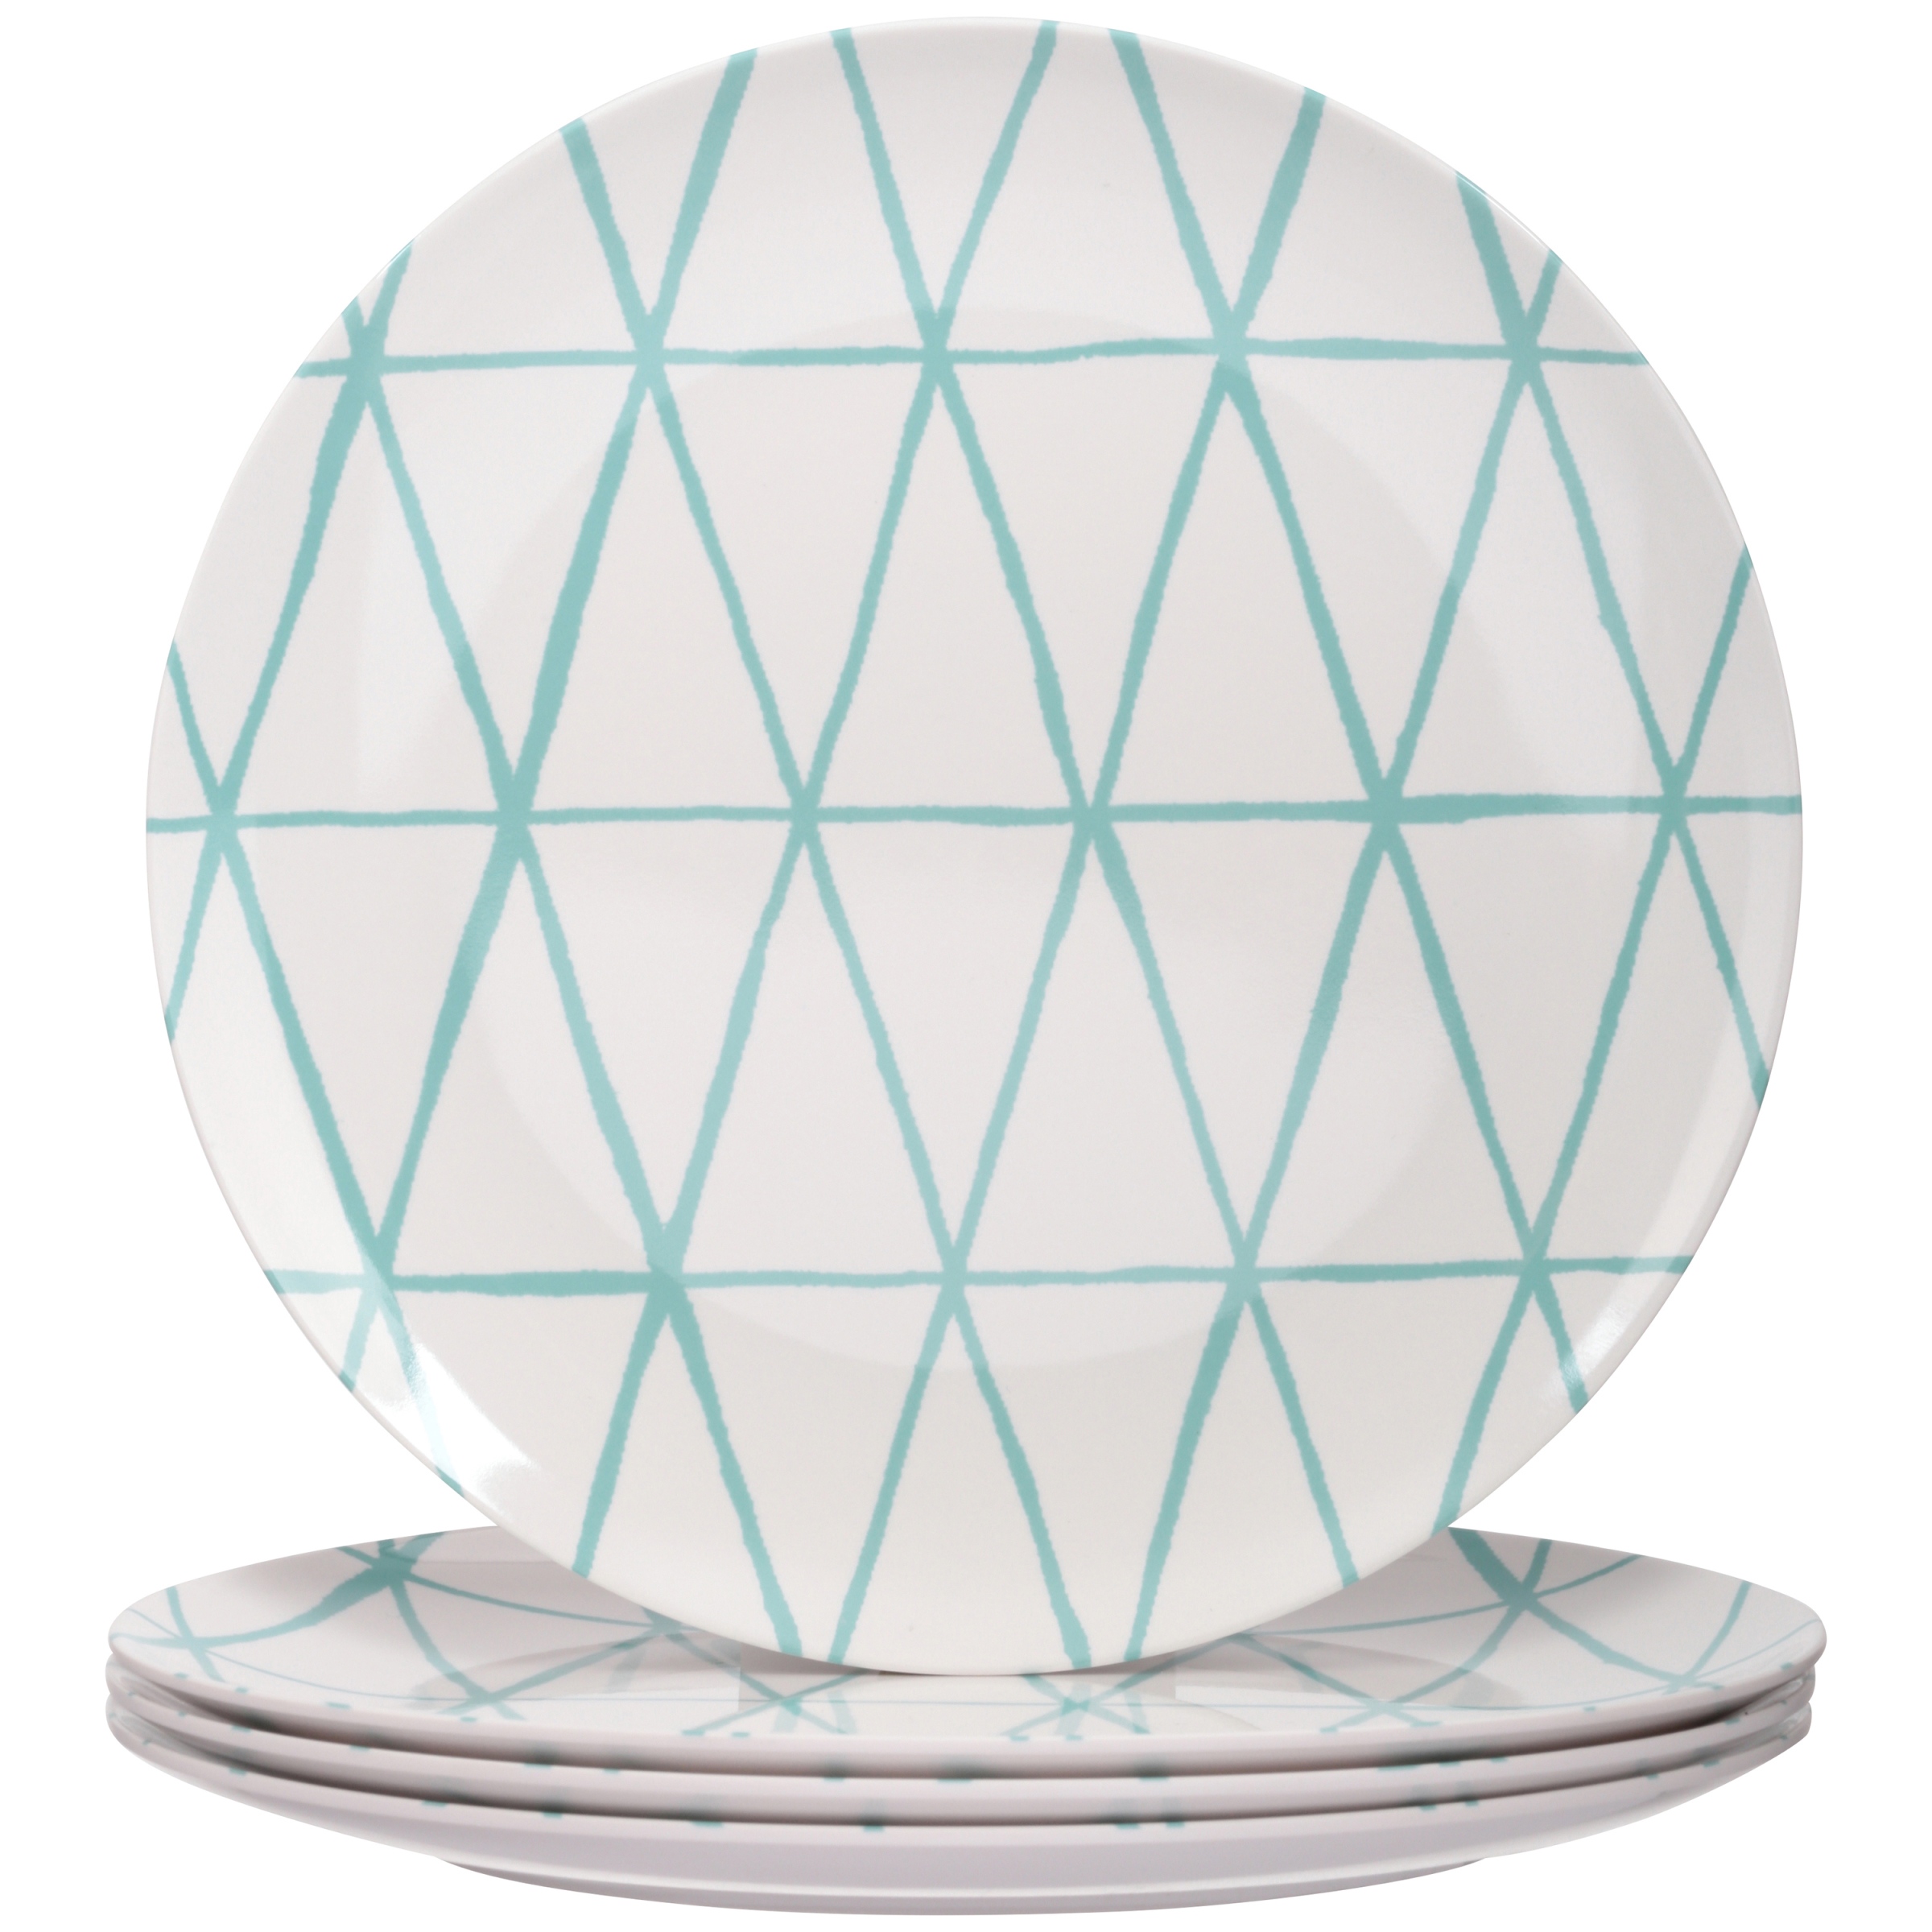 Better Homes & Gardens Outdoor Melamine Mint Triangle Lines Dinner Plate, Set of 4 - image 1 of 3